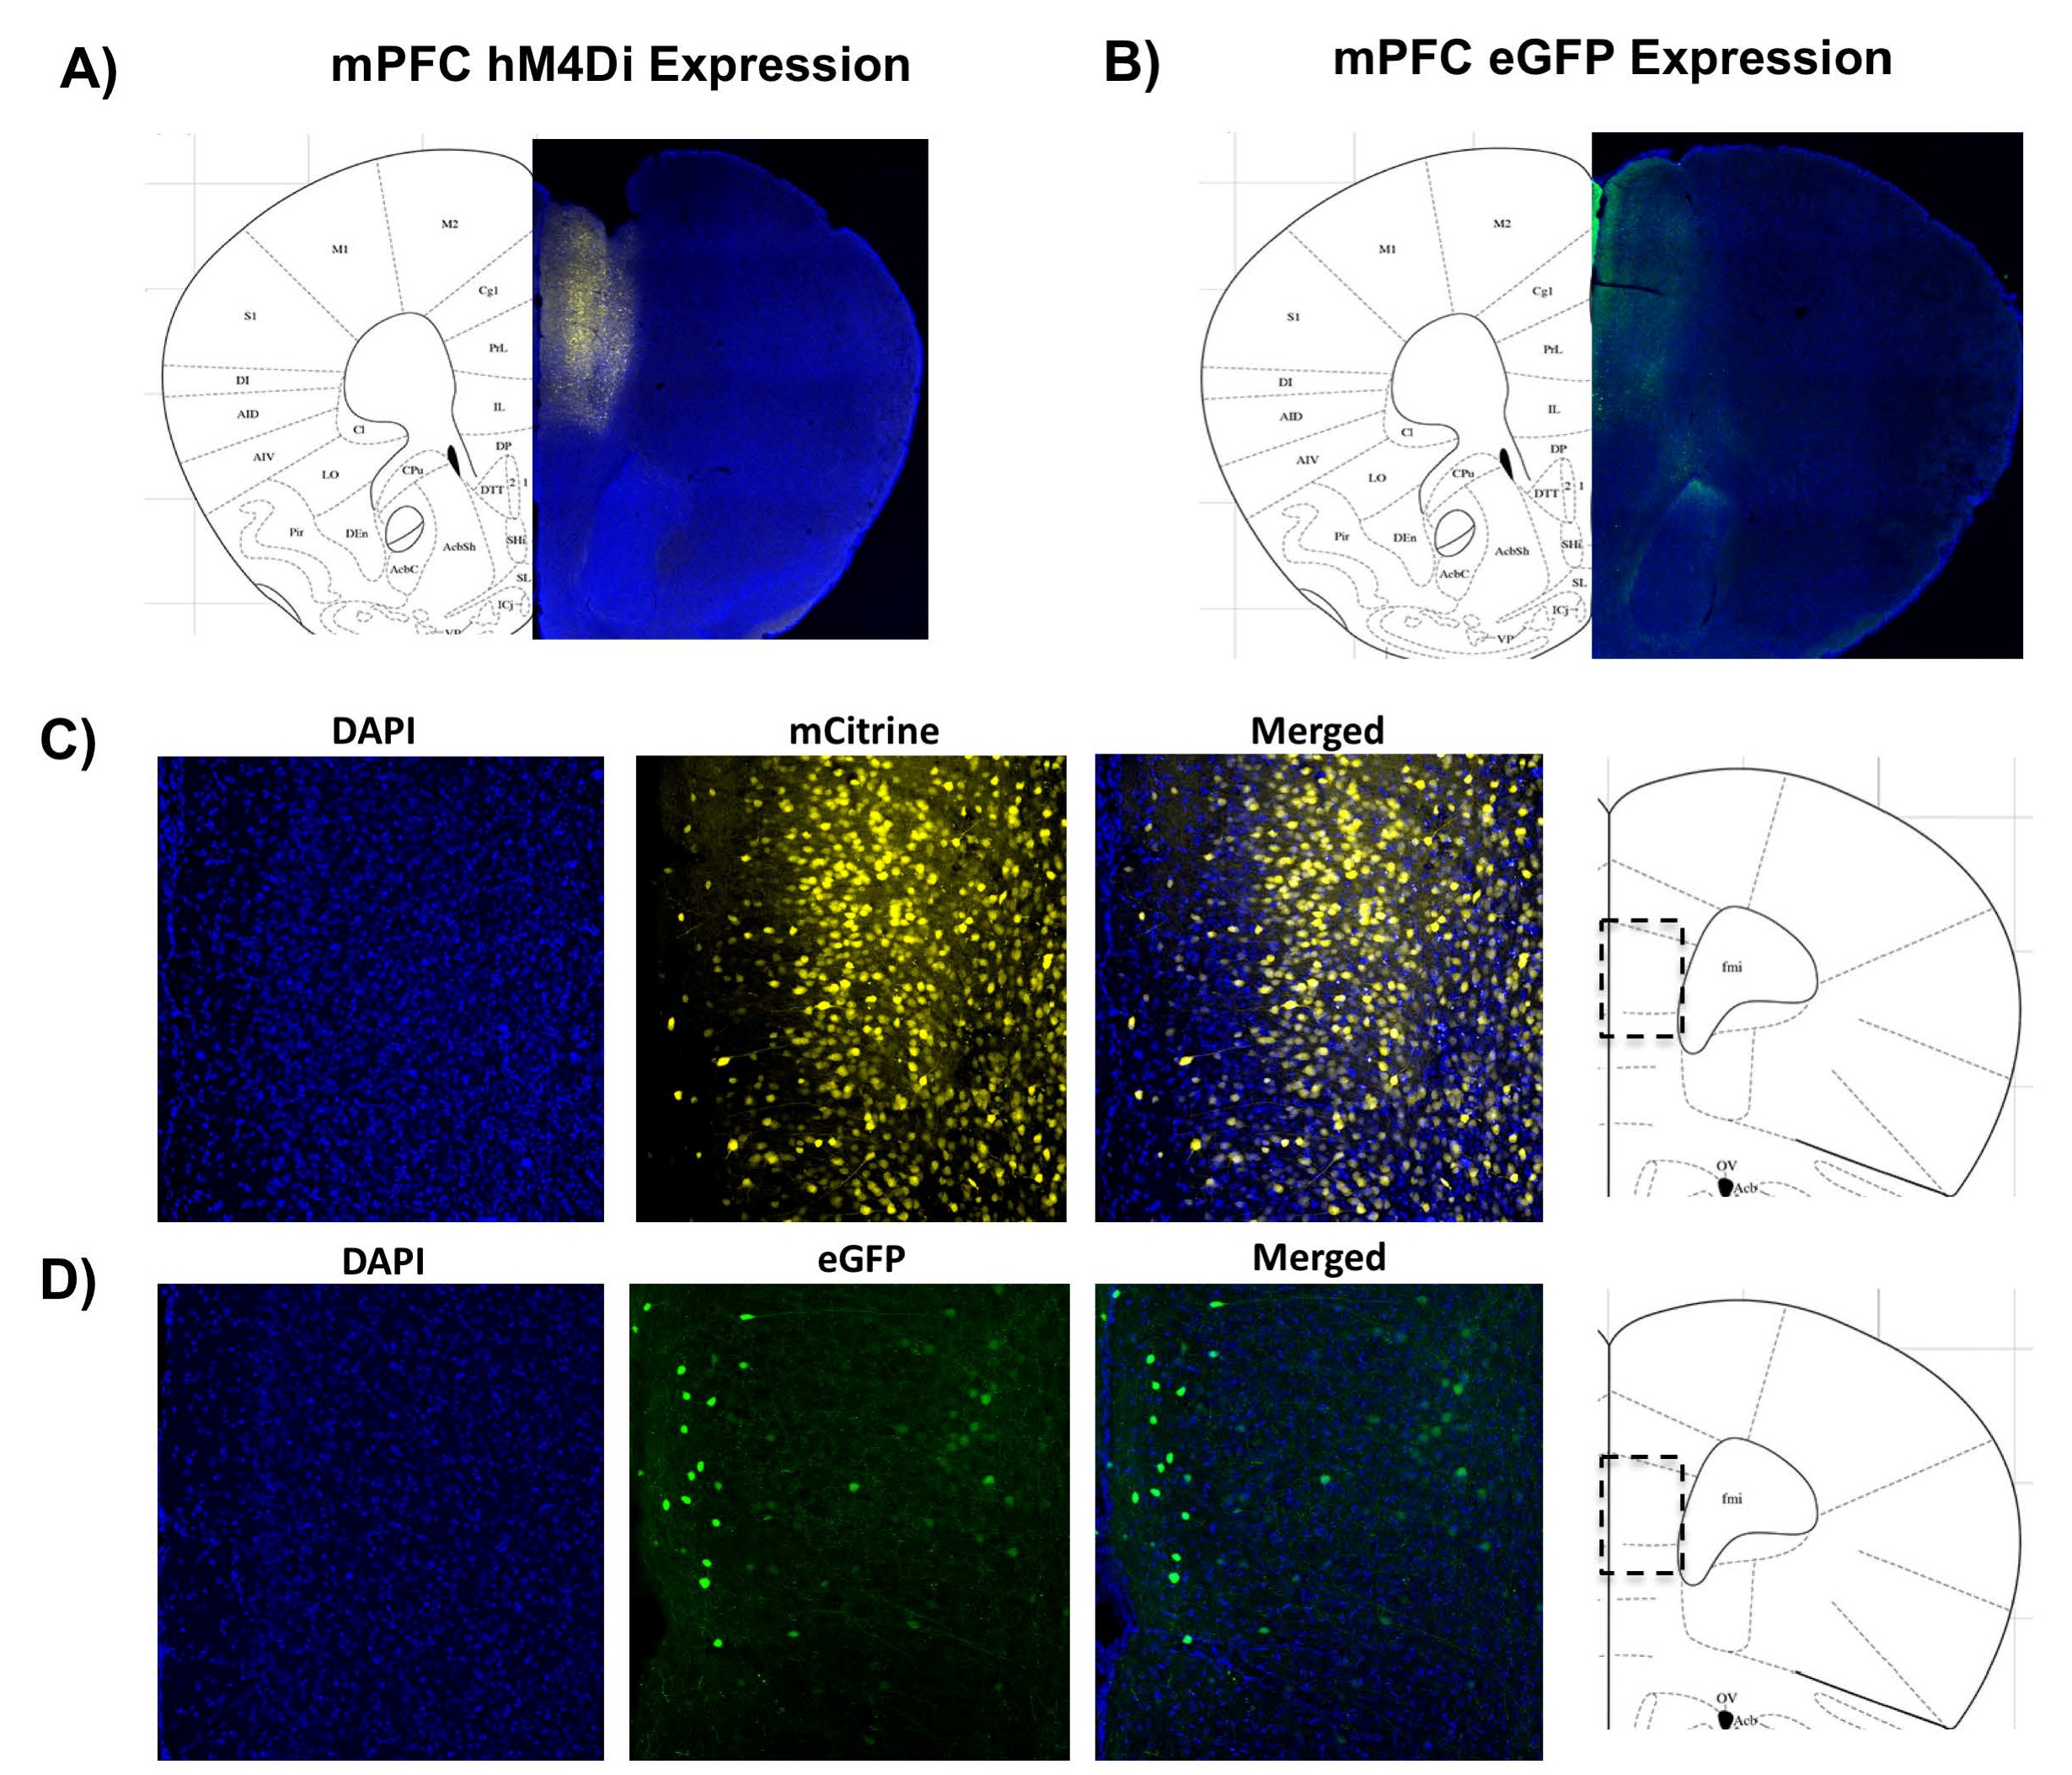 Figure 3. hM4Di and eGFP viral expression in the mPFC is present three weeks after injection. Coronal sections (40 µm) of CaMKIIα-hM4Di-mCitrine DREADD (A, C) or CaMKIIα-eGFP control virus (B, D) in the mPFC of female mice three weeks after injection confirms virus expression throughout the mPFC. Blue puncta: DAPI, a marker of cell nuclei; yellow: mCitrine-tagged DREADD virus; green: eGFP-tagged control virus. Merged images provide additional spatial context for DREADD or control virus expression within the region of interest.